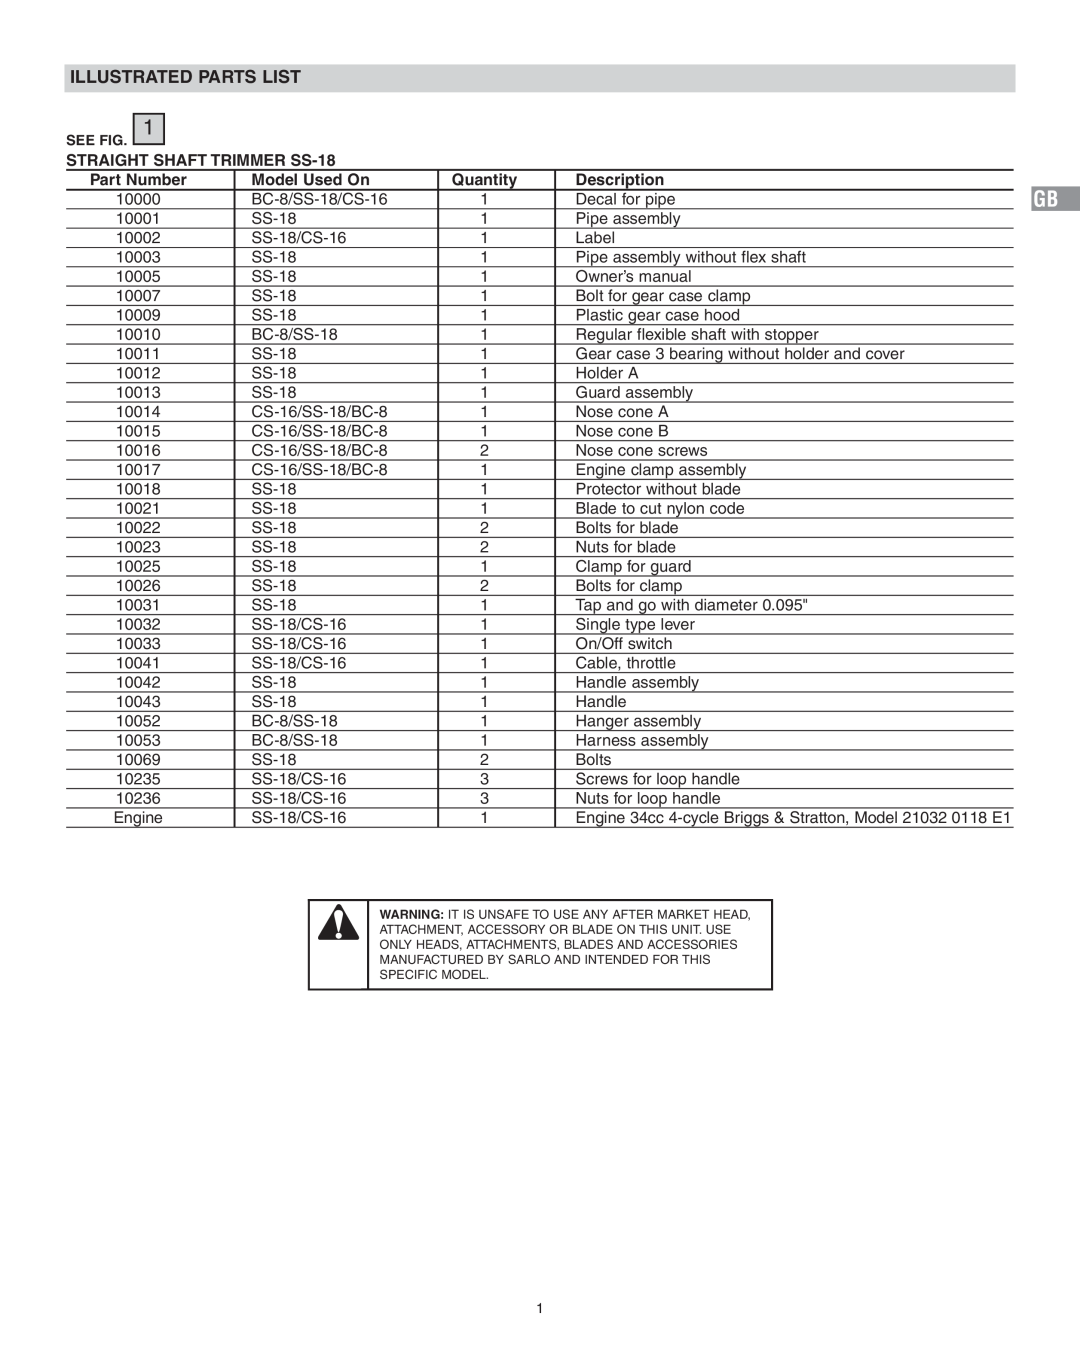 Sarlo Illustrated Parts List, STRAIGHT SHAFT TRIMMER SS-18, Part Number, Model Used On, Quantity, Description 